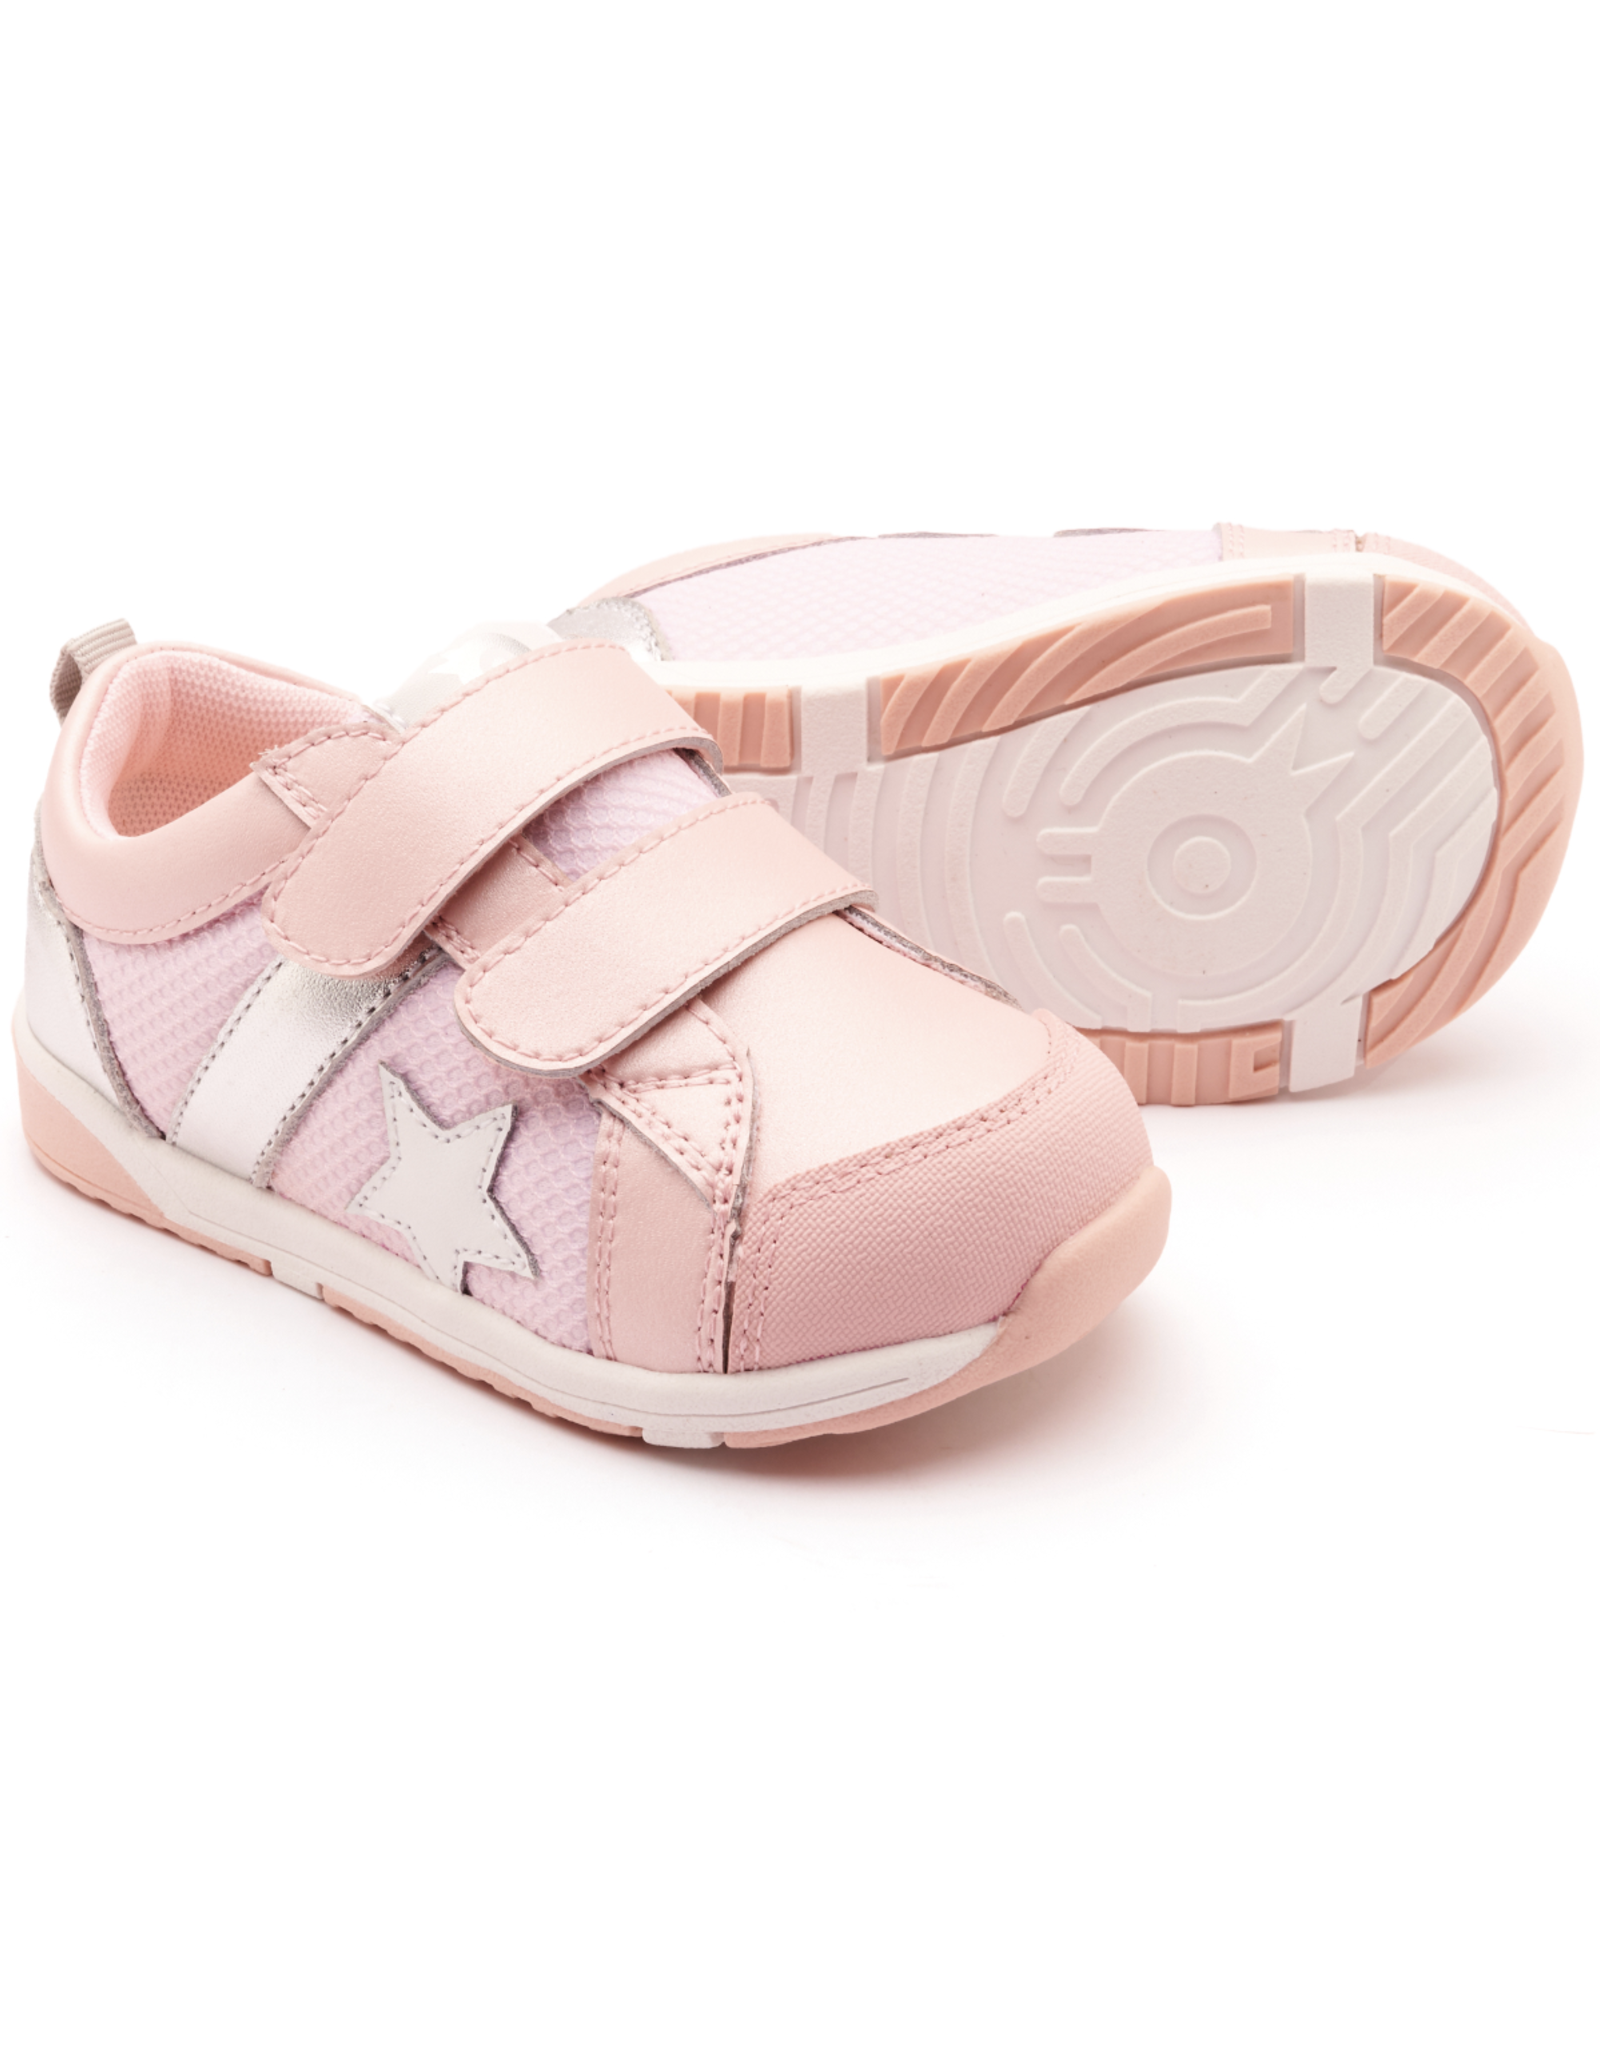 Old Soles 2111 Fresh Tracks Pink/Silver